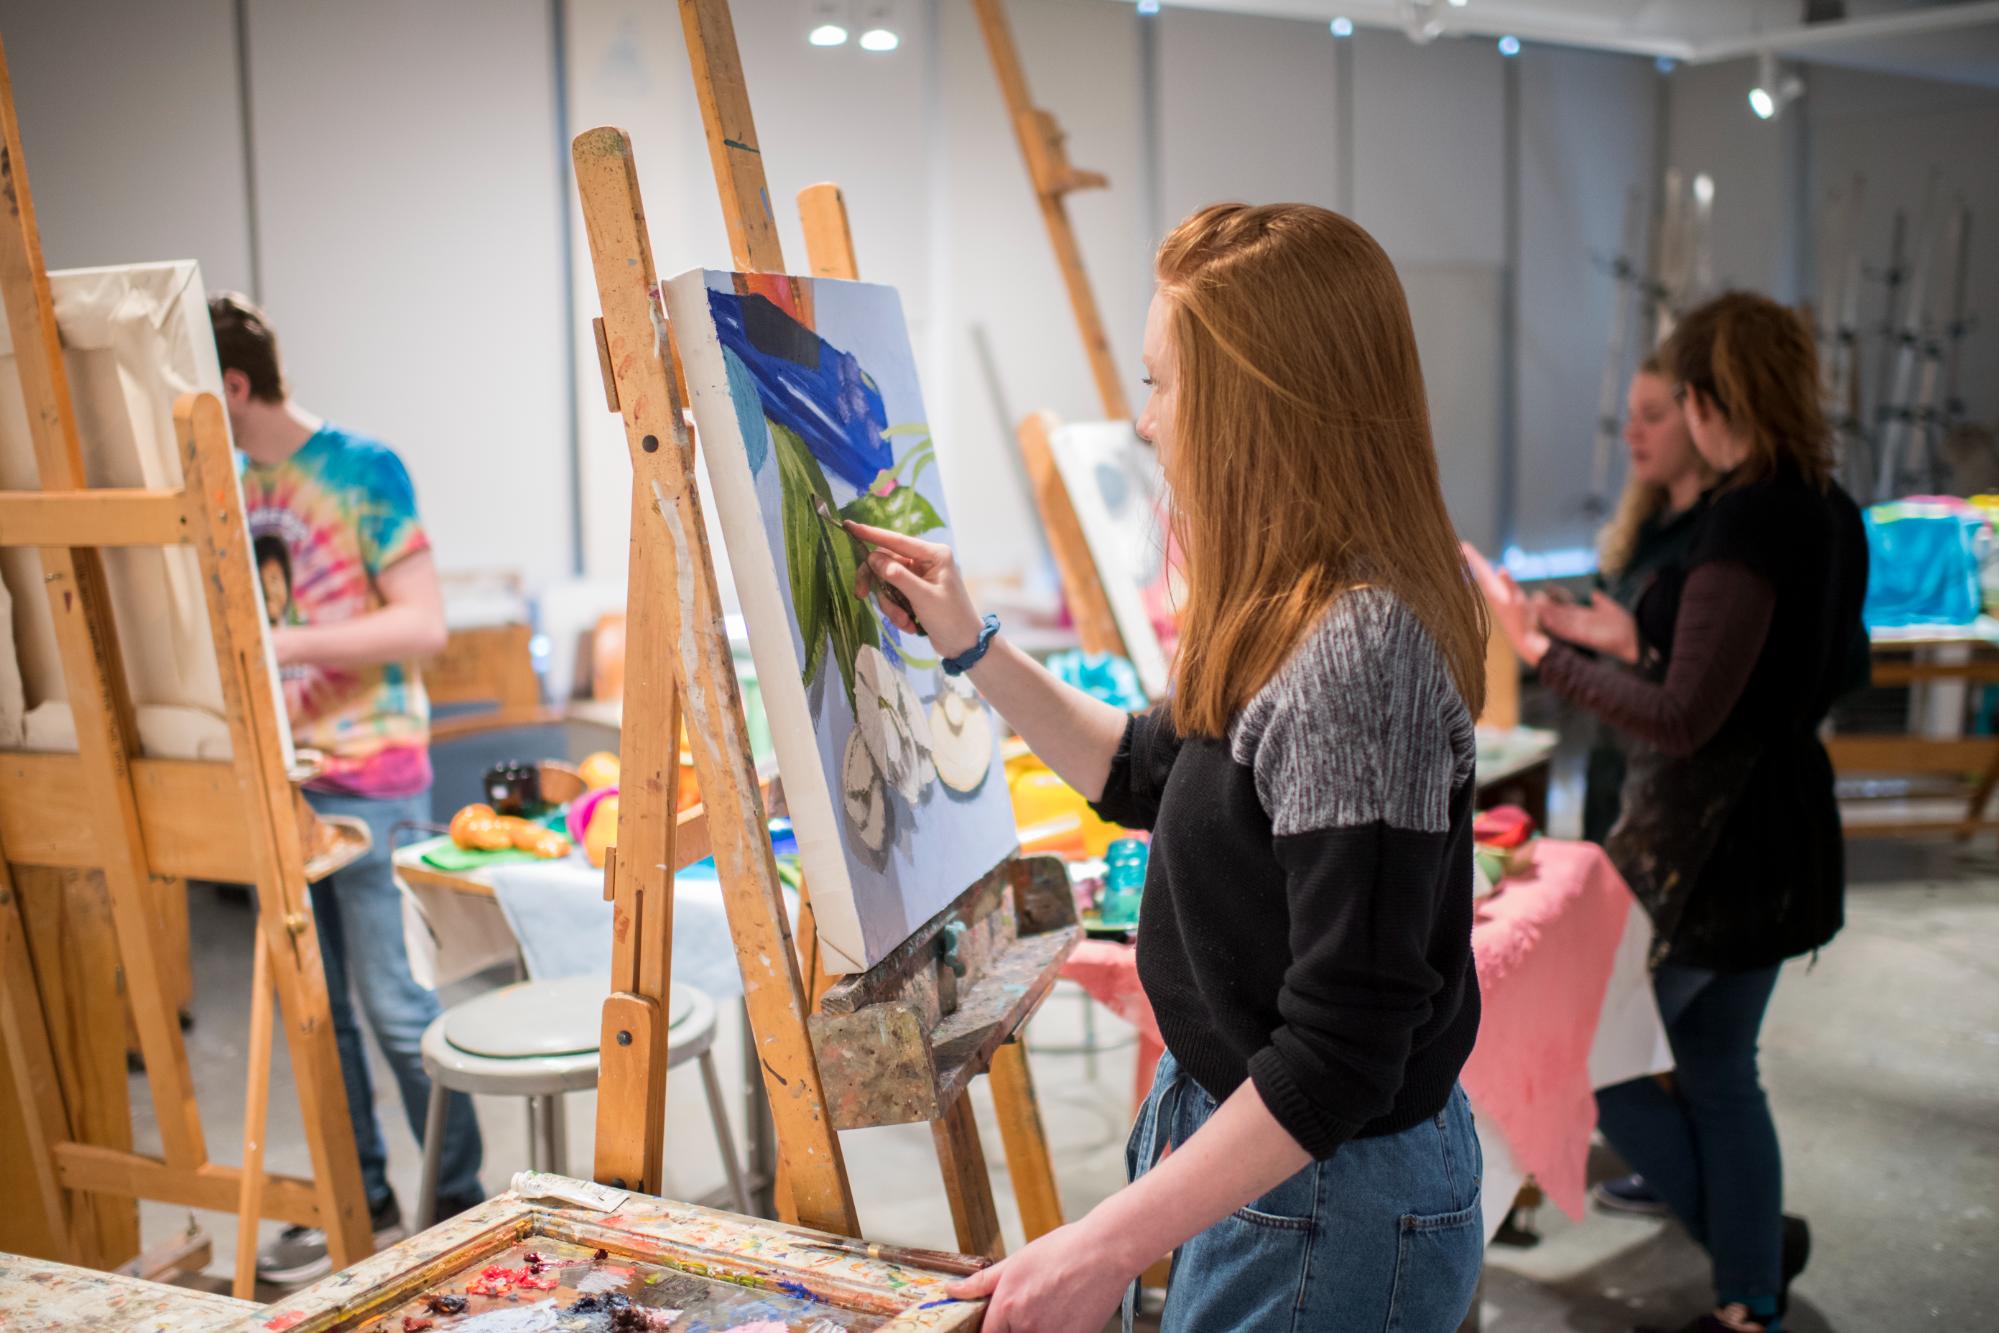 Students painting on easels